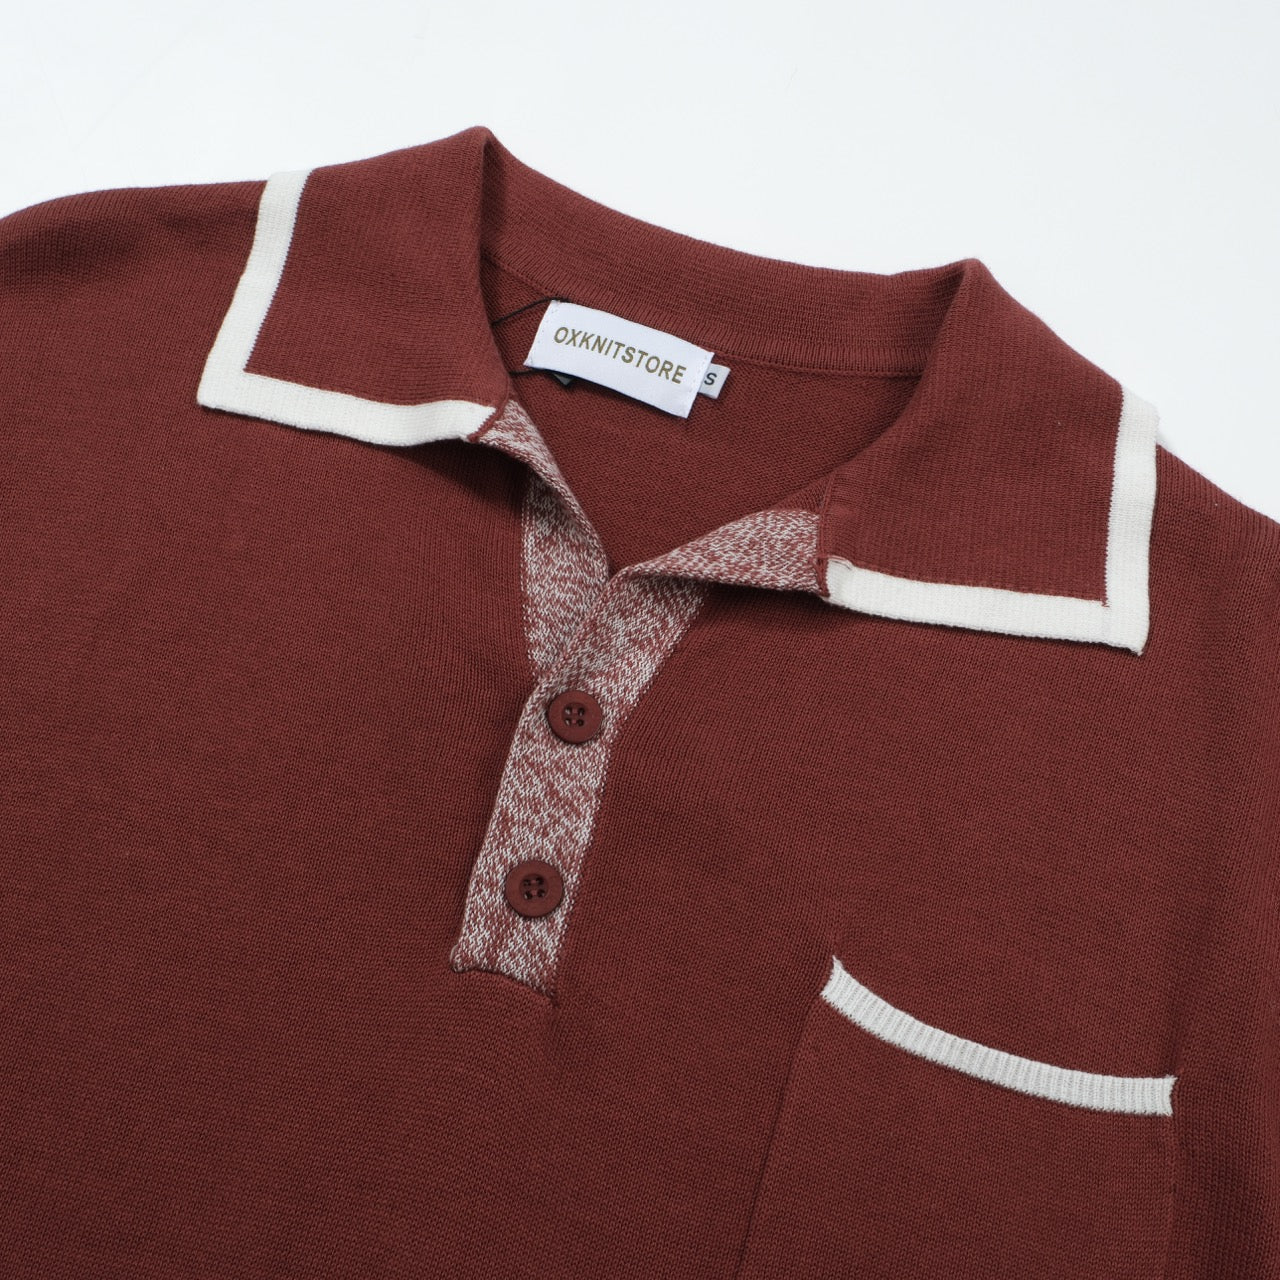 OXKNIT Men Vintage Clothing 1960s Mod Style Casual Red Brown Knitted Retro Polo Single Pocket